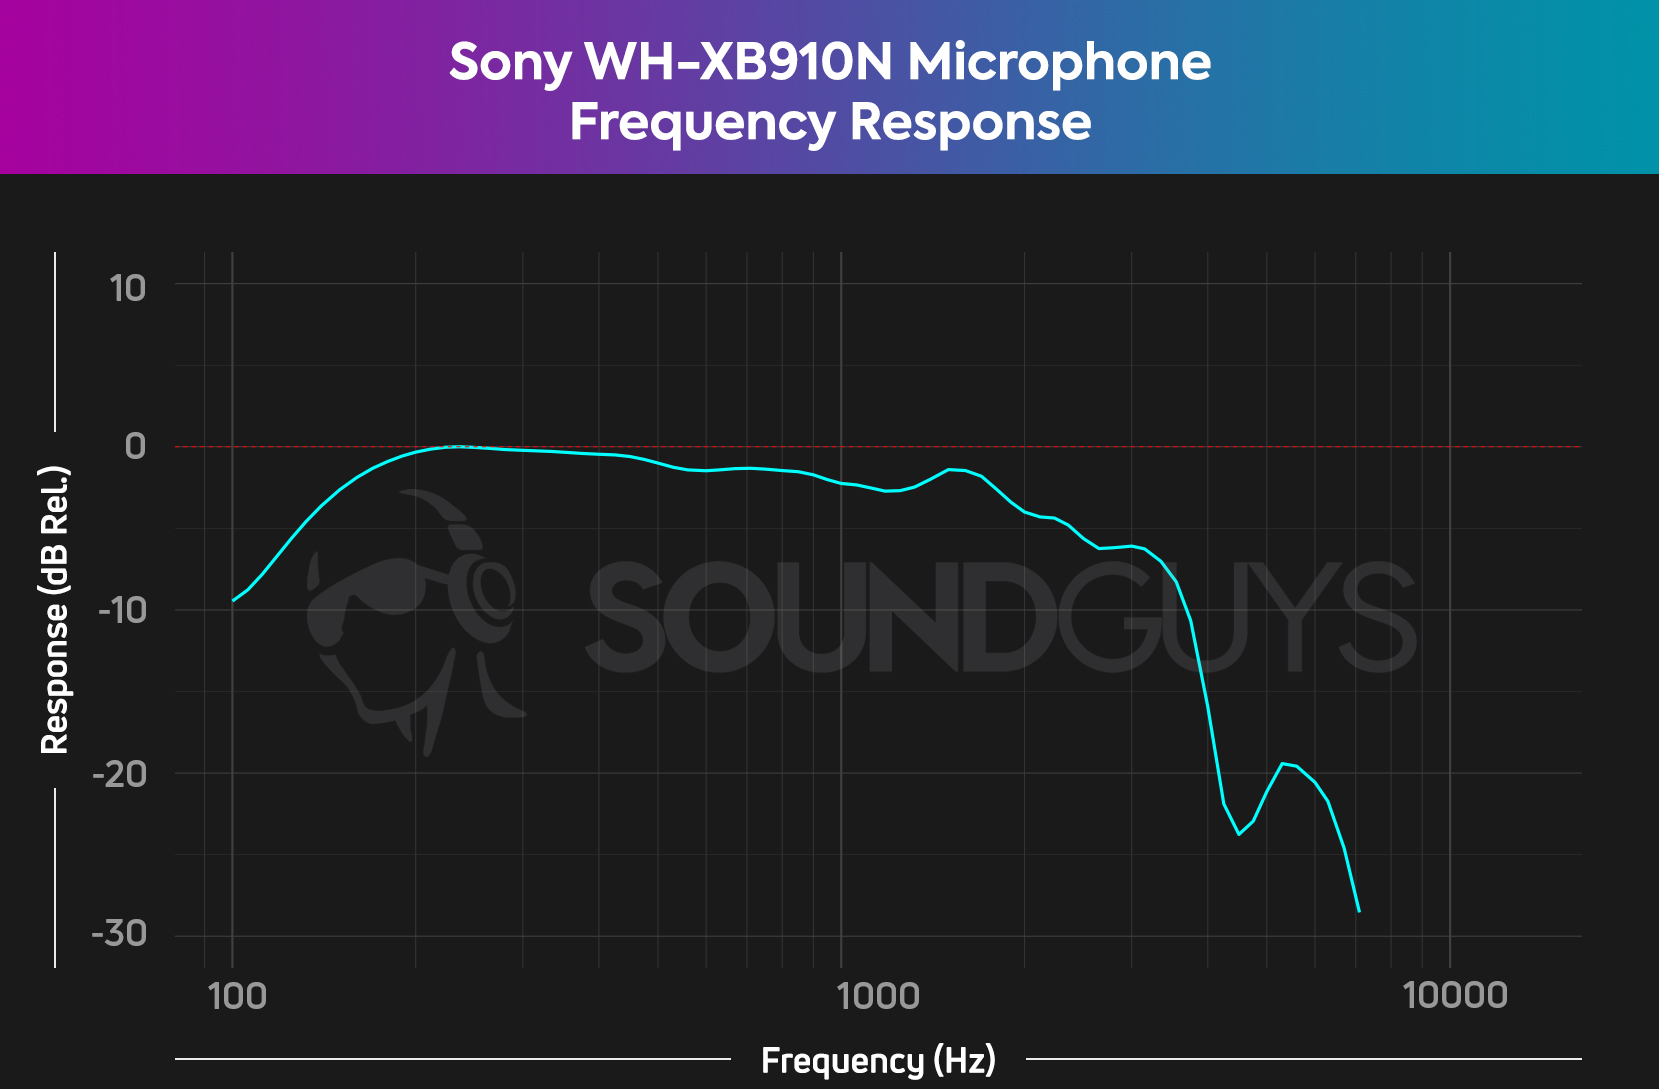 A chart shows the frequency response of the Sony WH-XB910N microphone performance.